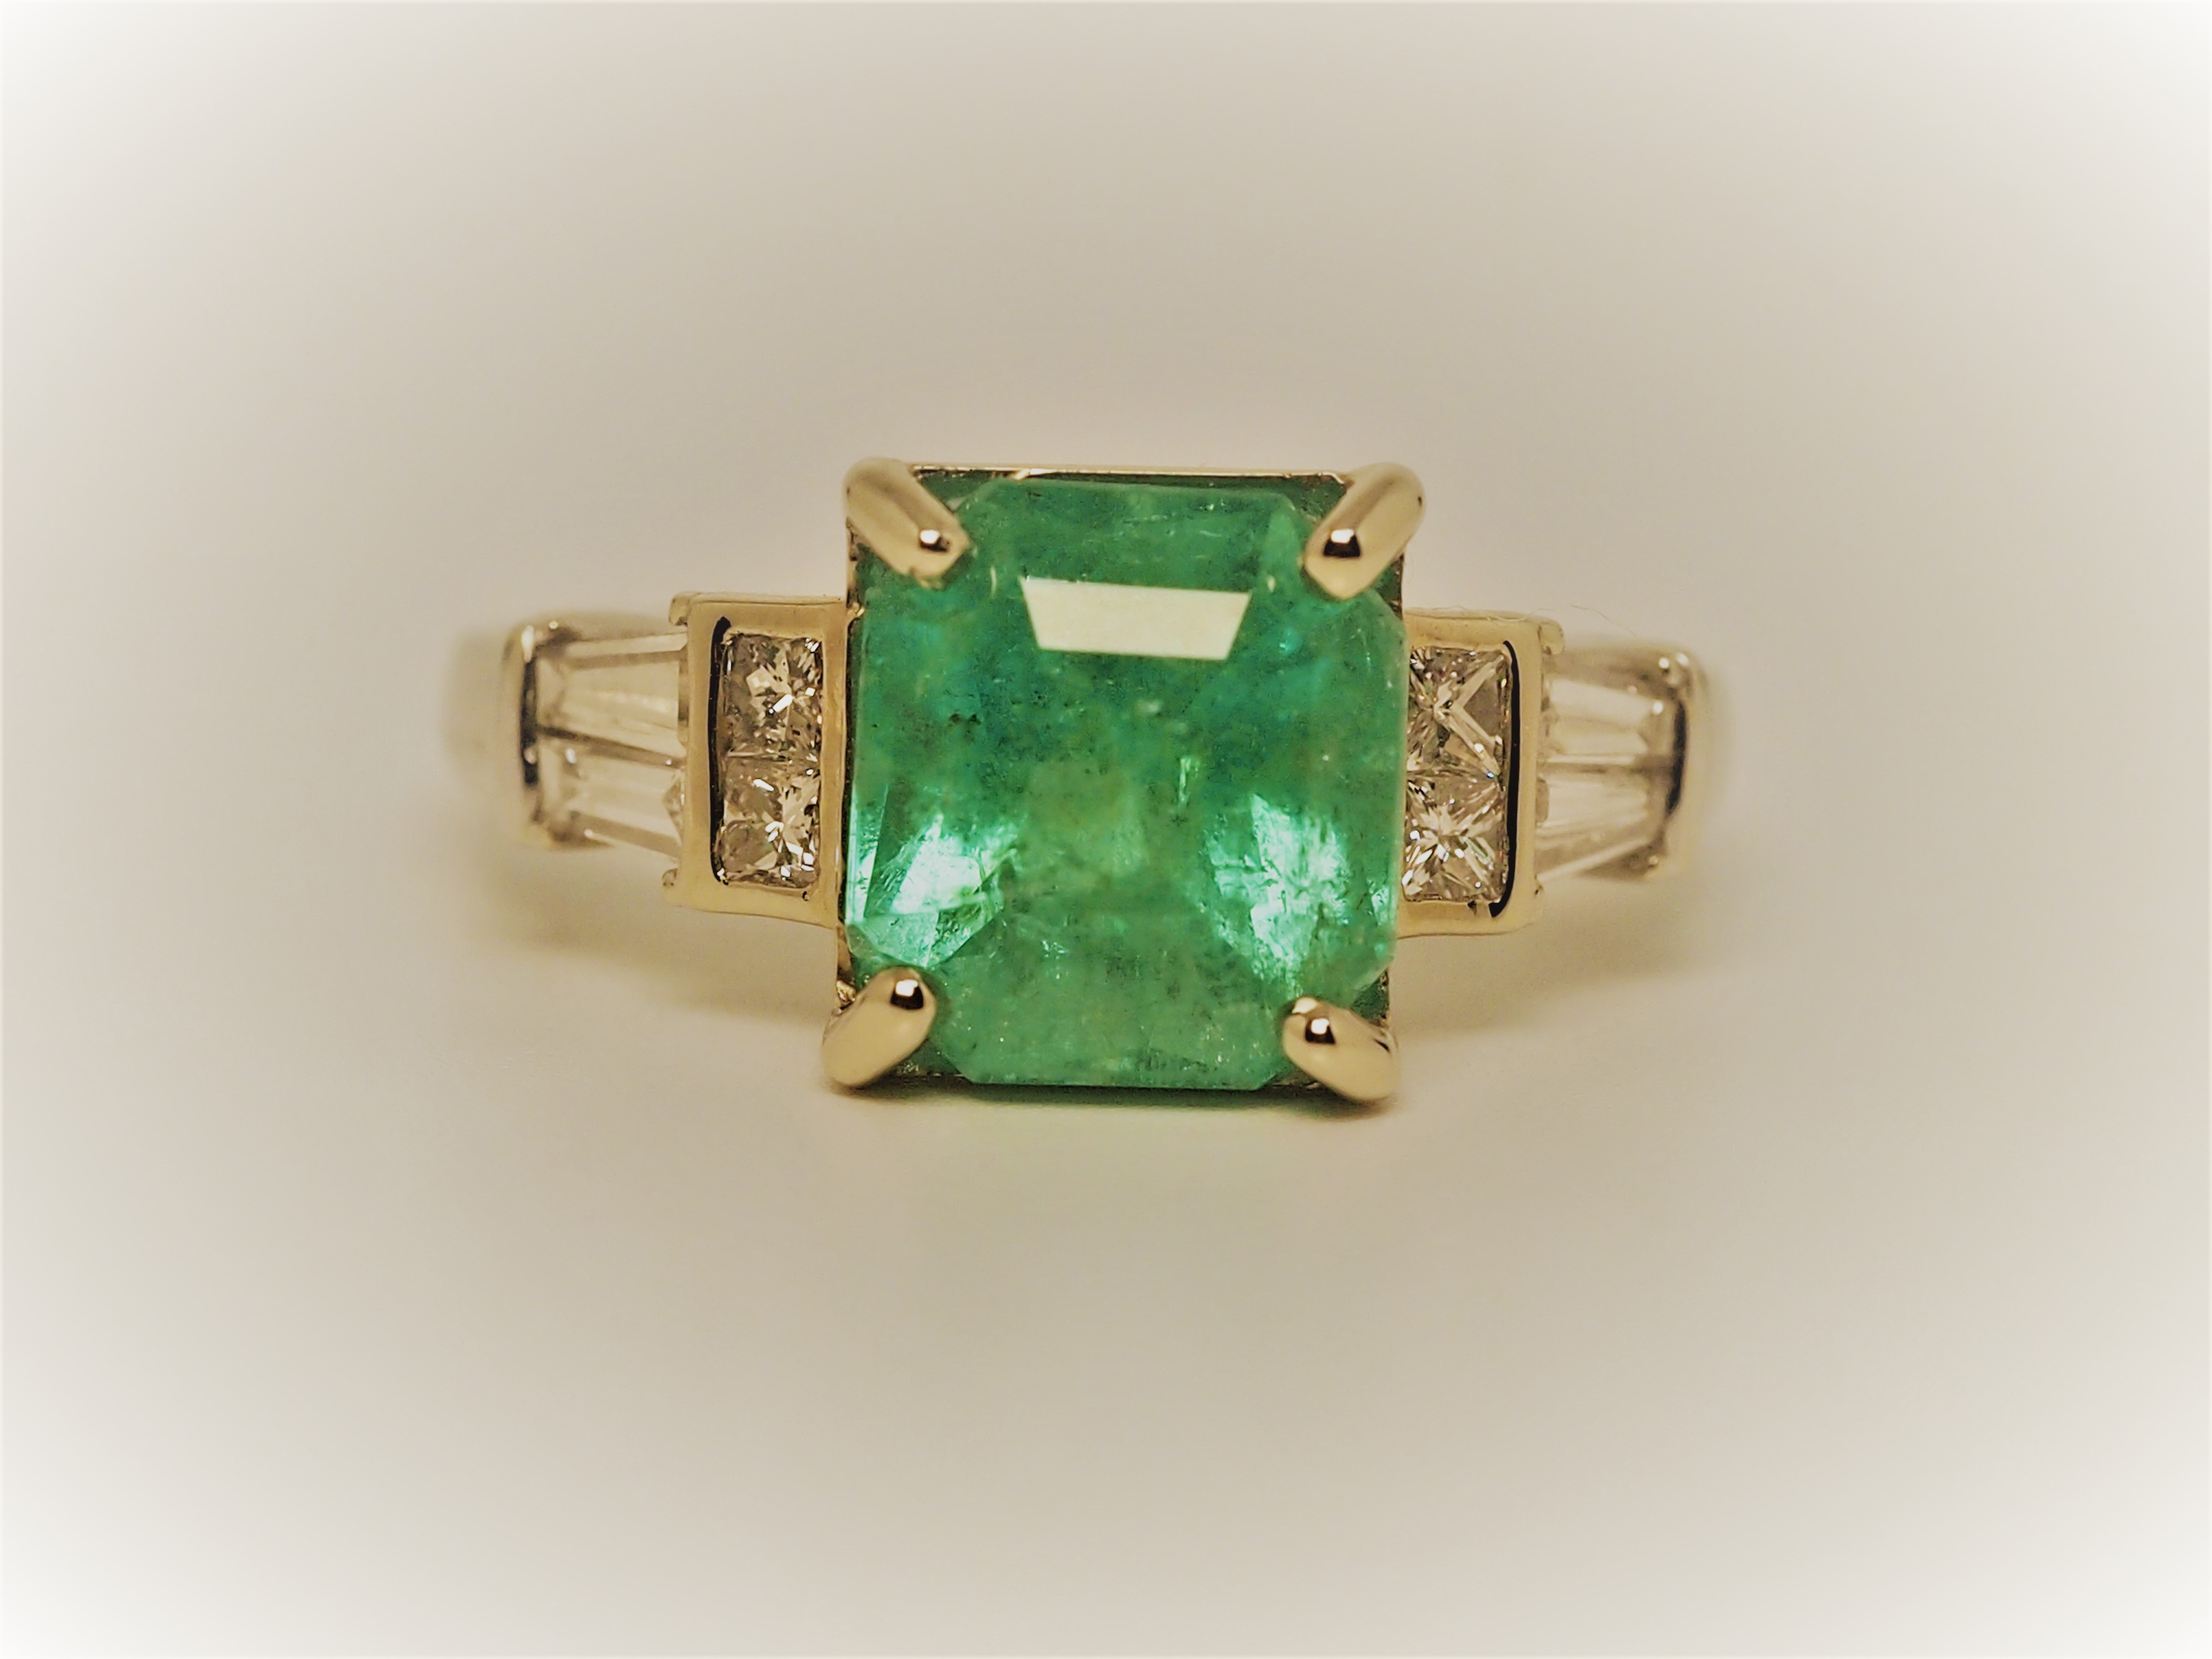 Exclusive Gia Certified 2.82 Ct Vivid Green Colombian Emerald & Diamonds Ring - Image 6 of 9